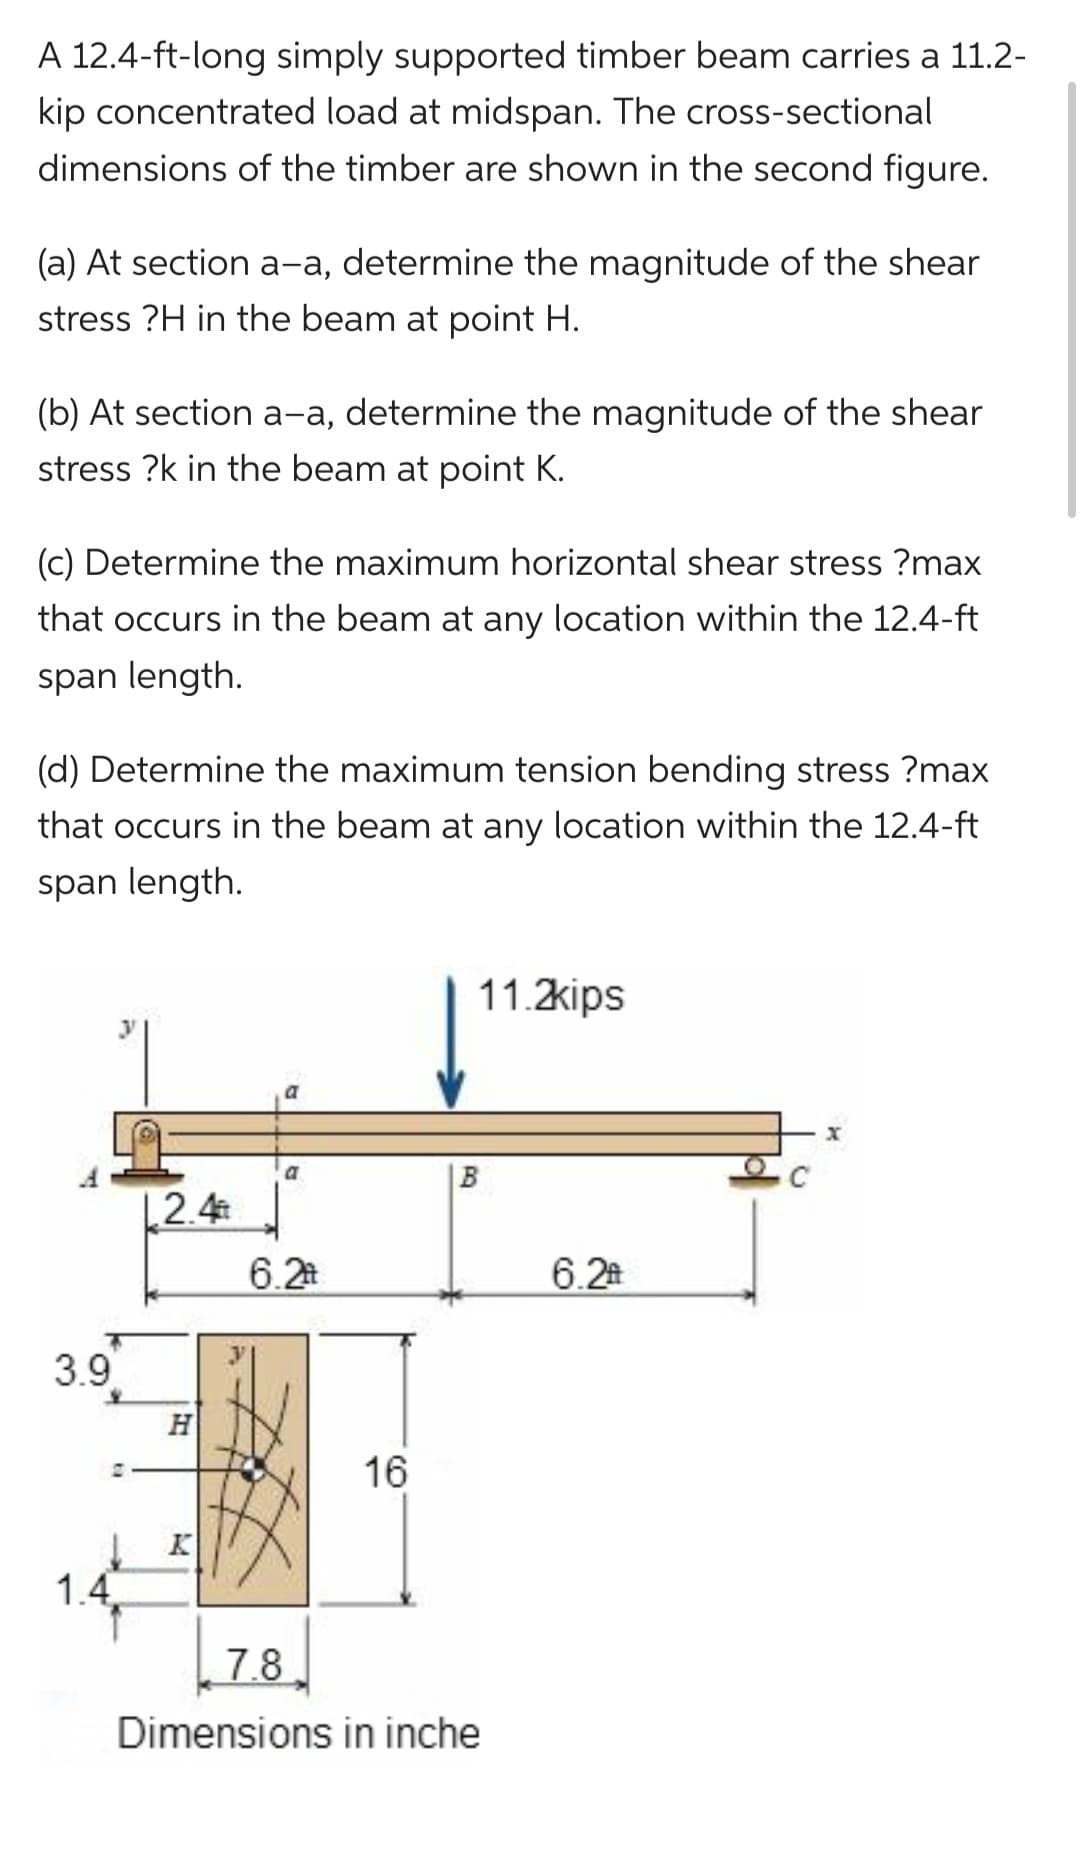 A 12.4-ft-long simply supported timber beam carries a 11.2-
kip concentrated load at midspan. The cross-sectional
dimensions of the timber are shown in the second figure.
(a) At section a-a, determine the magnitude of the shear
stress ?H in the beam at point H.
(b) At section a-a, determine the magnitude of the shear
stress ?k in the beam at point K.
(c) Determine the maximum horizontal shear stress ?max
that occurs in the beam at any location within the 12.4-ft
span length.
(d) Determine the maximum tension bending stress ?max
that occurs in the beam at any location within the 12.4-ft
span length.
3.9
1.4.
1.2.4
H
a
a
6.2
16
11.2kips
7.8
Dimensions in inche
6.2
x